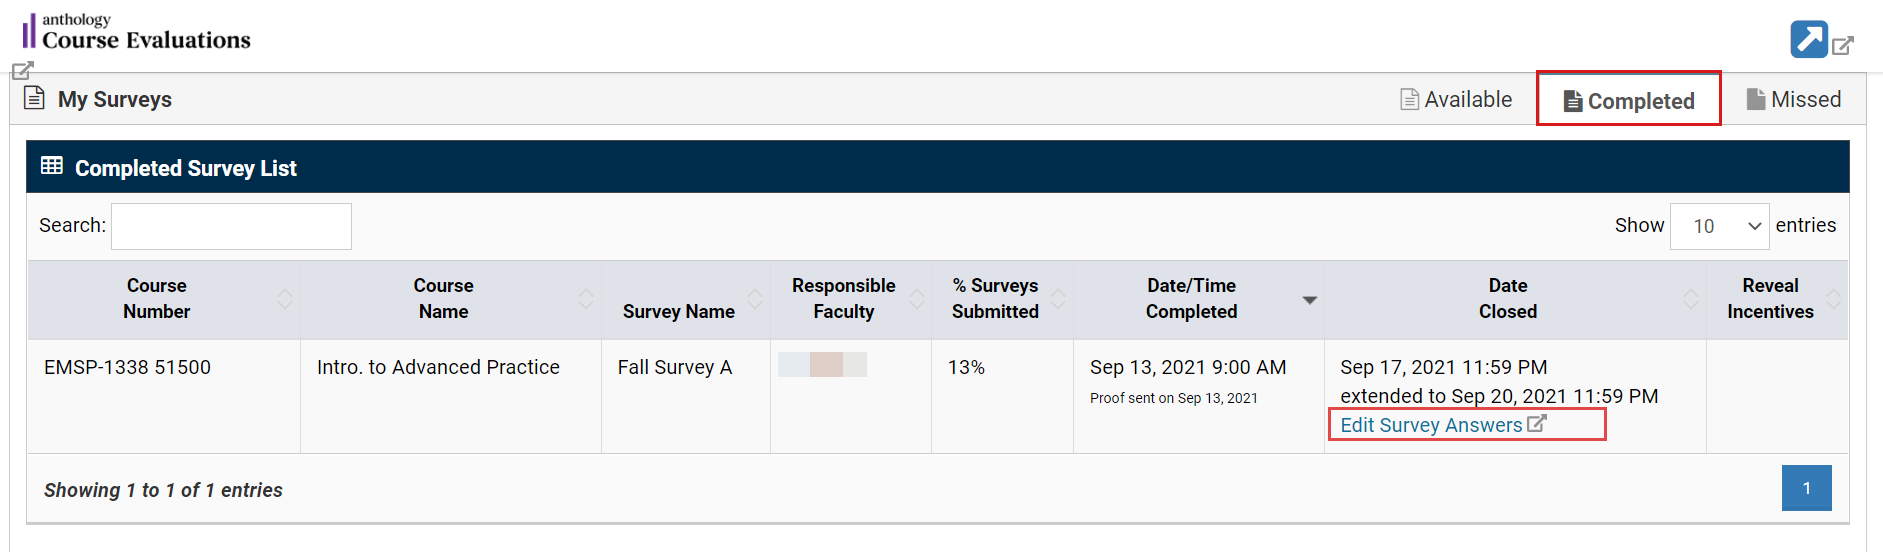 Screenshot of My Surveys list with Completed tab and Edit Survey Answers link highlighted.